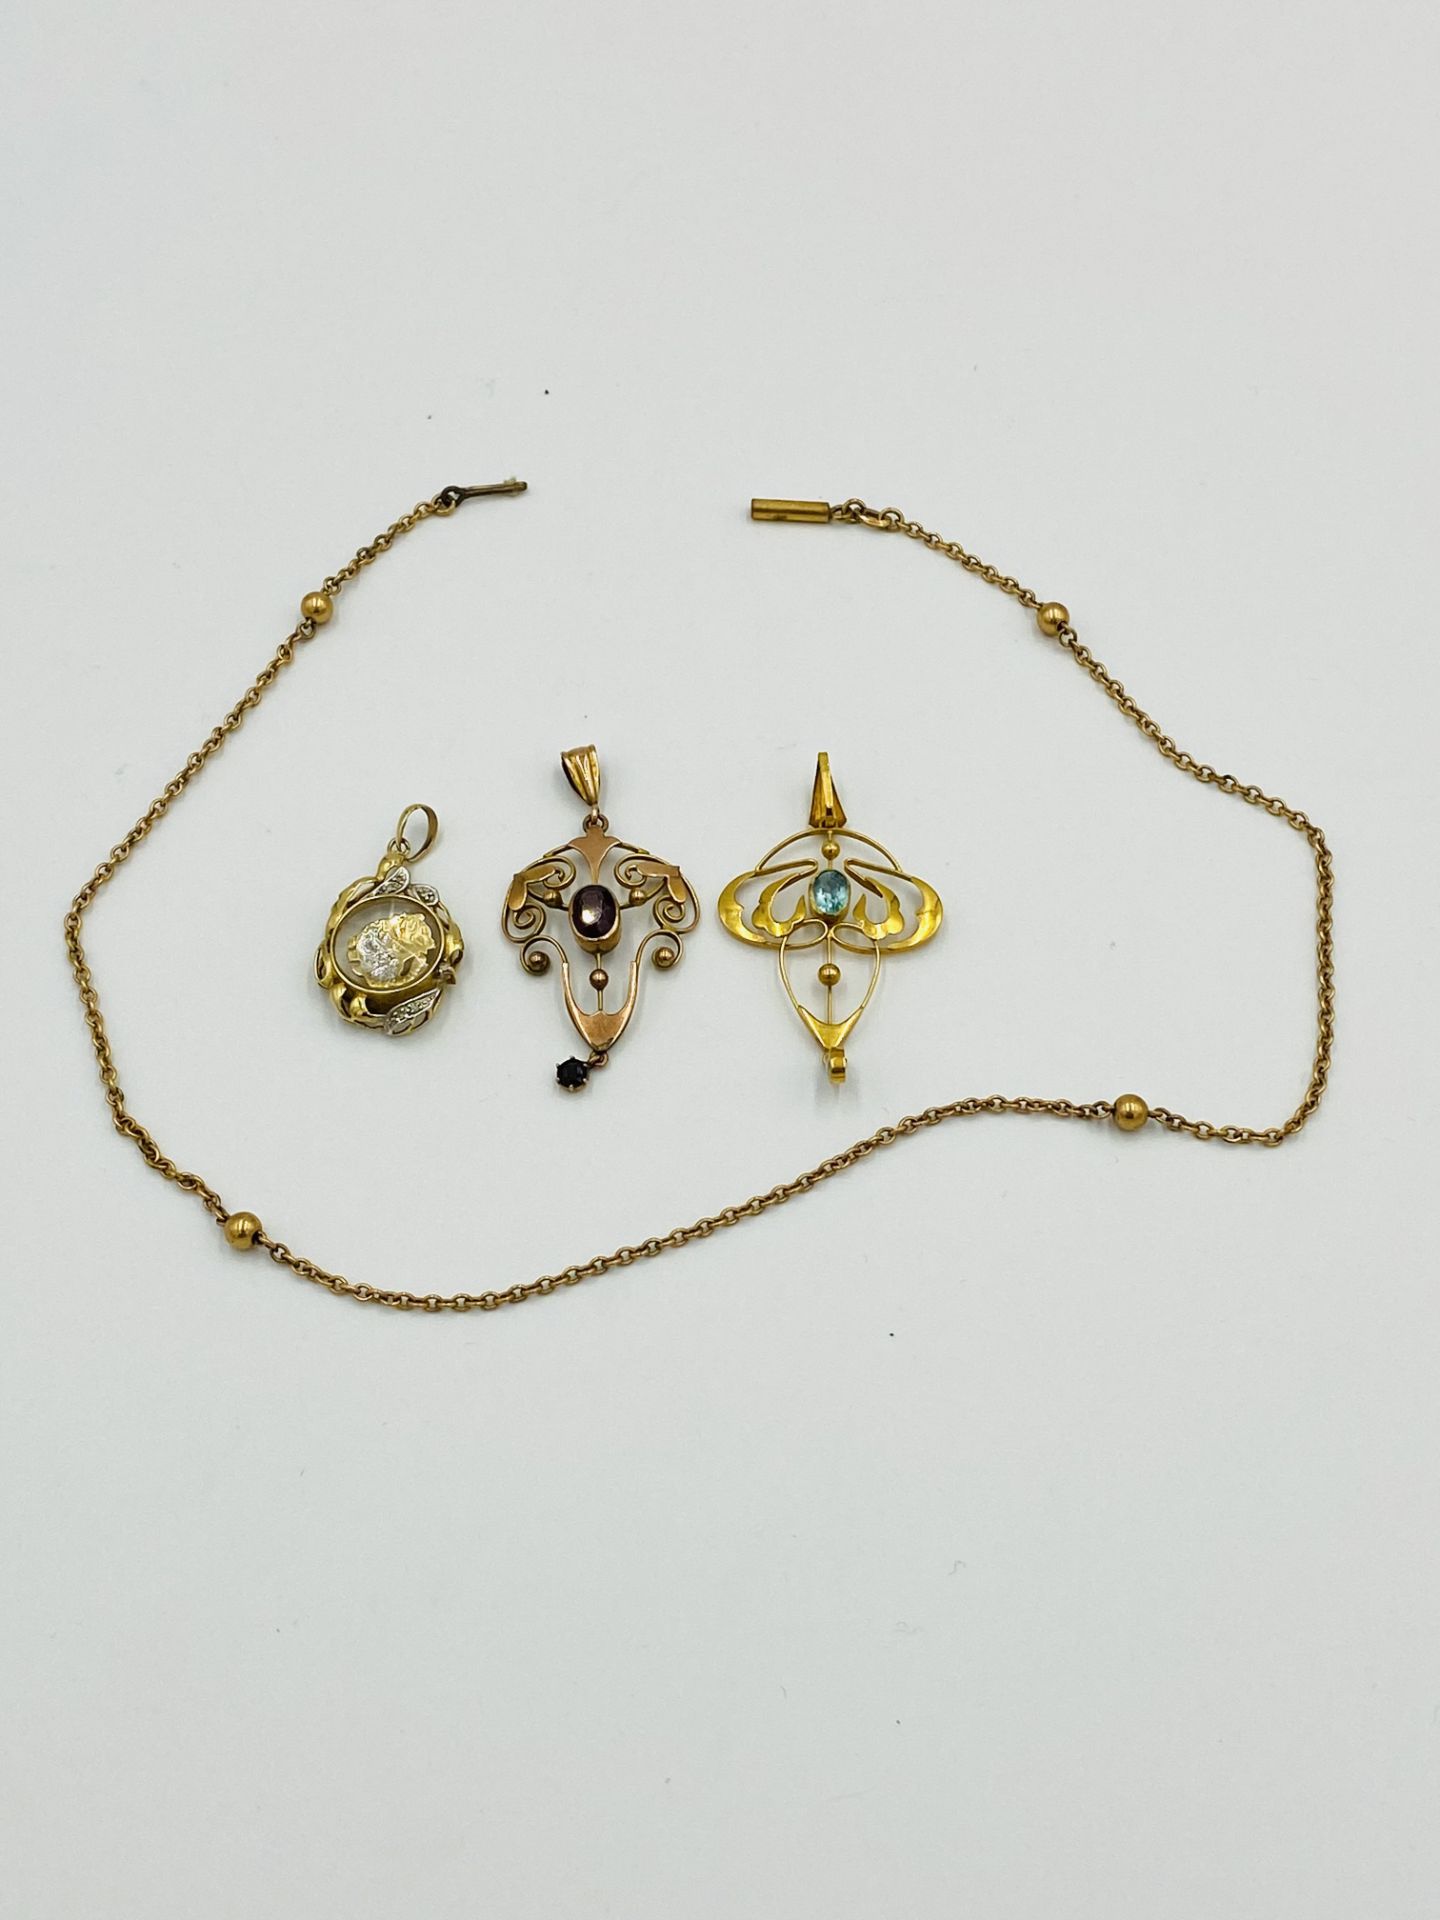 18ct gold and diamond pendant together with two 9ct gold pendants